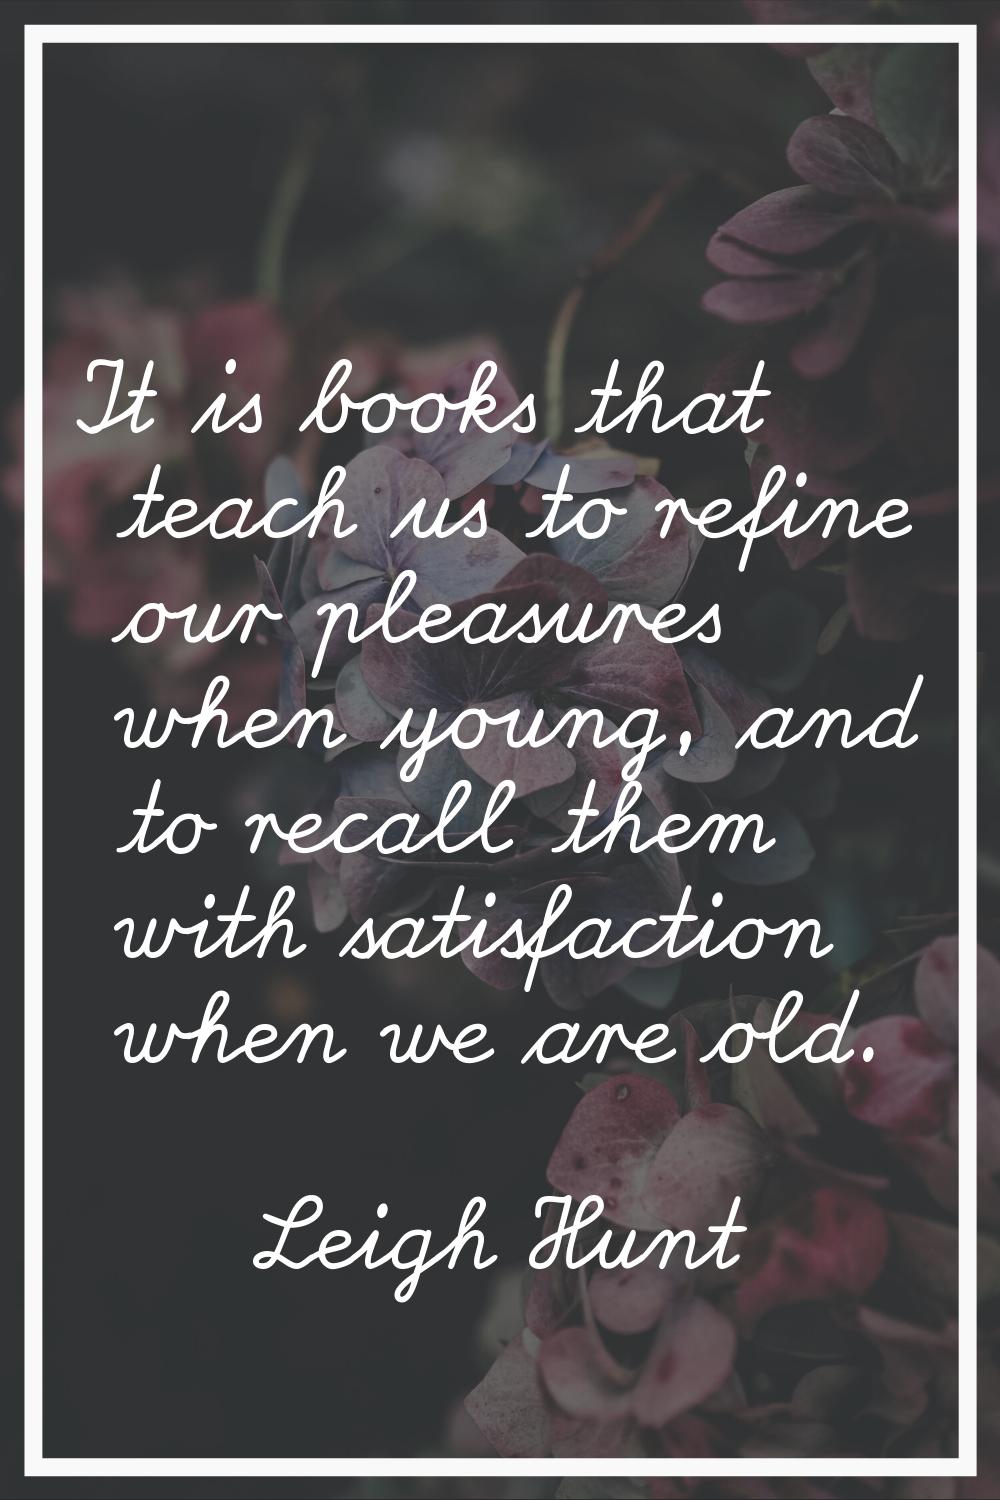 It is books that teach us to refine our pleasures when young, and to recall them with satisfaction 